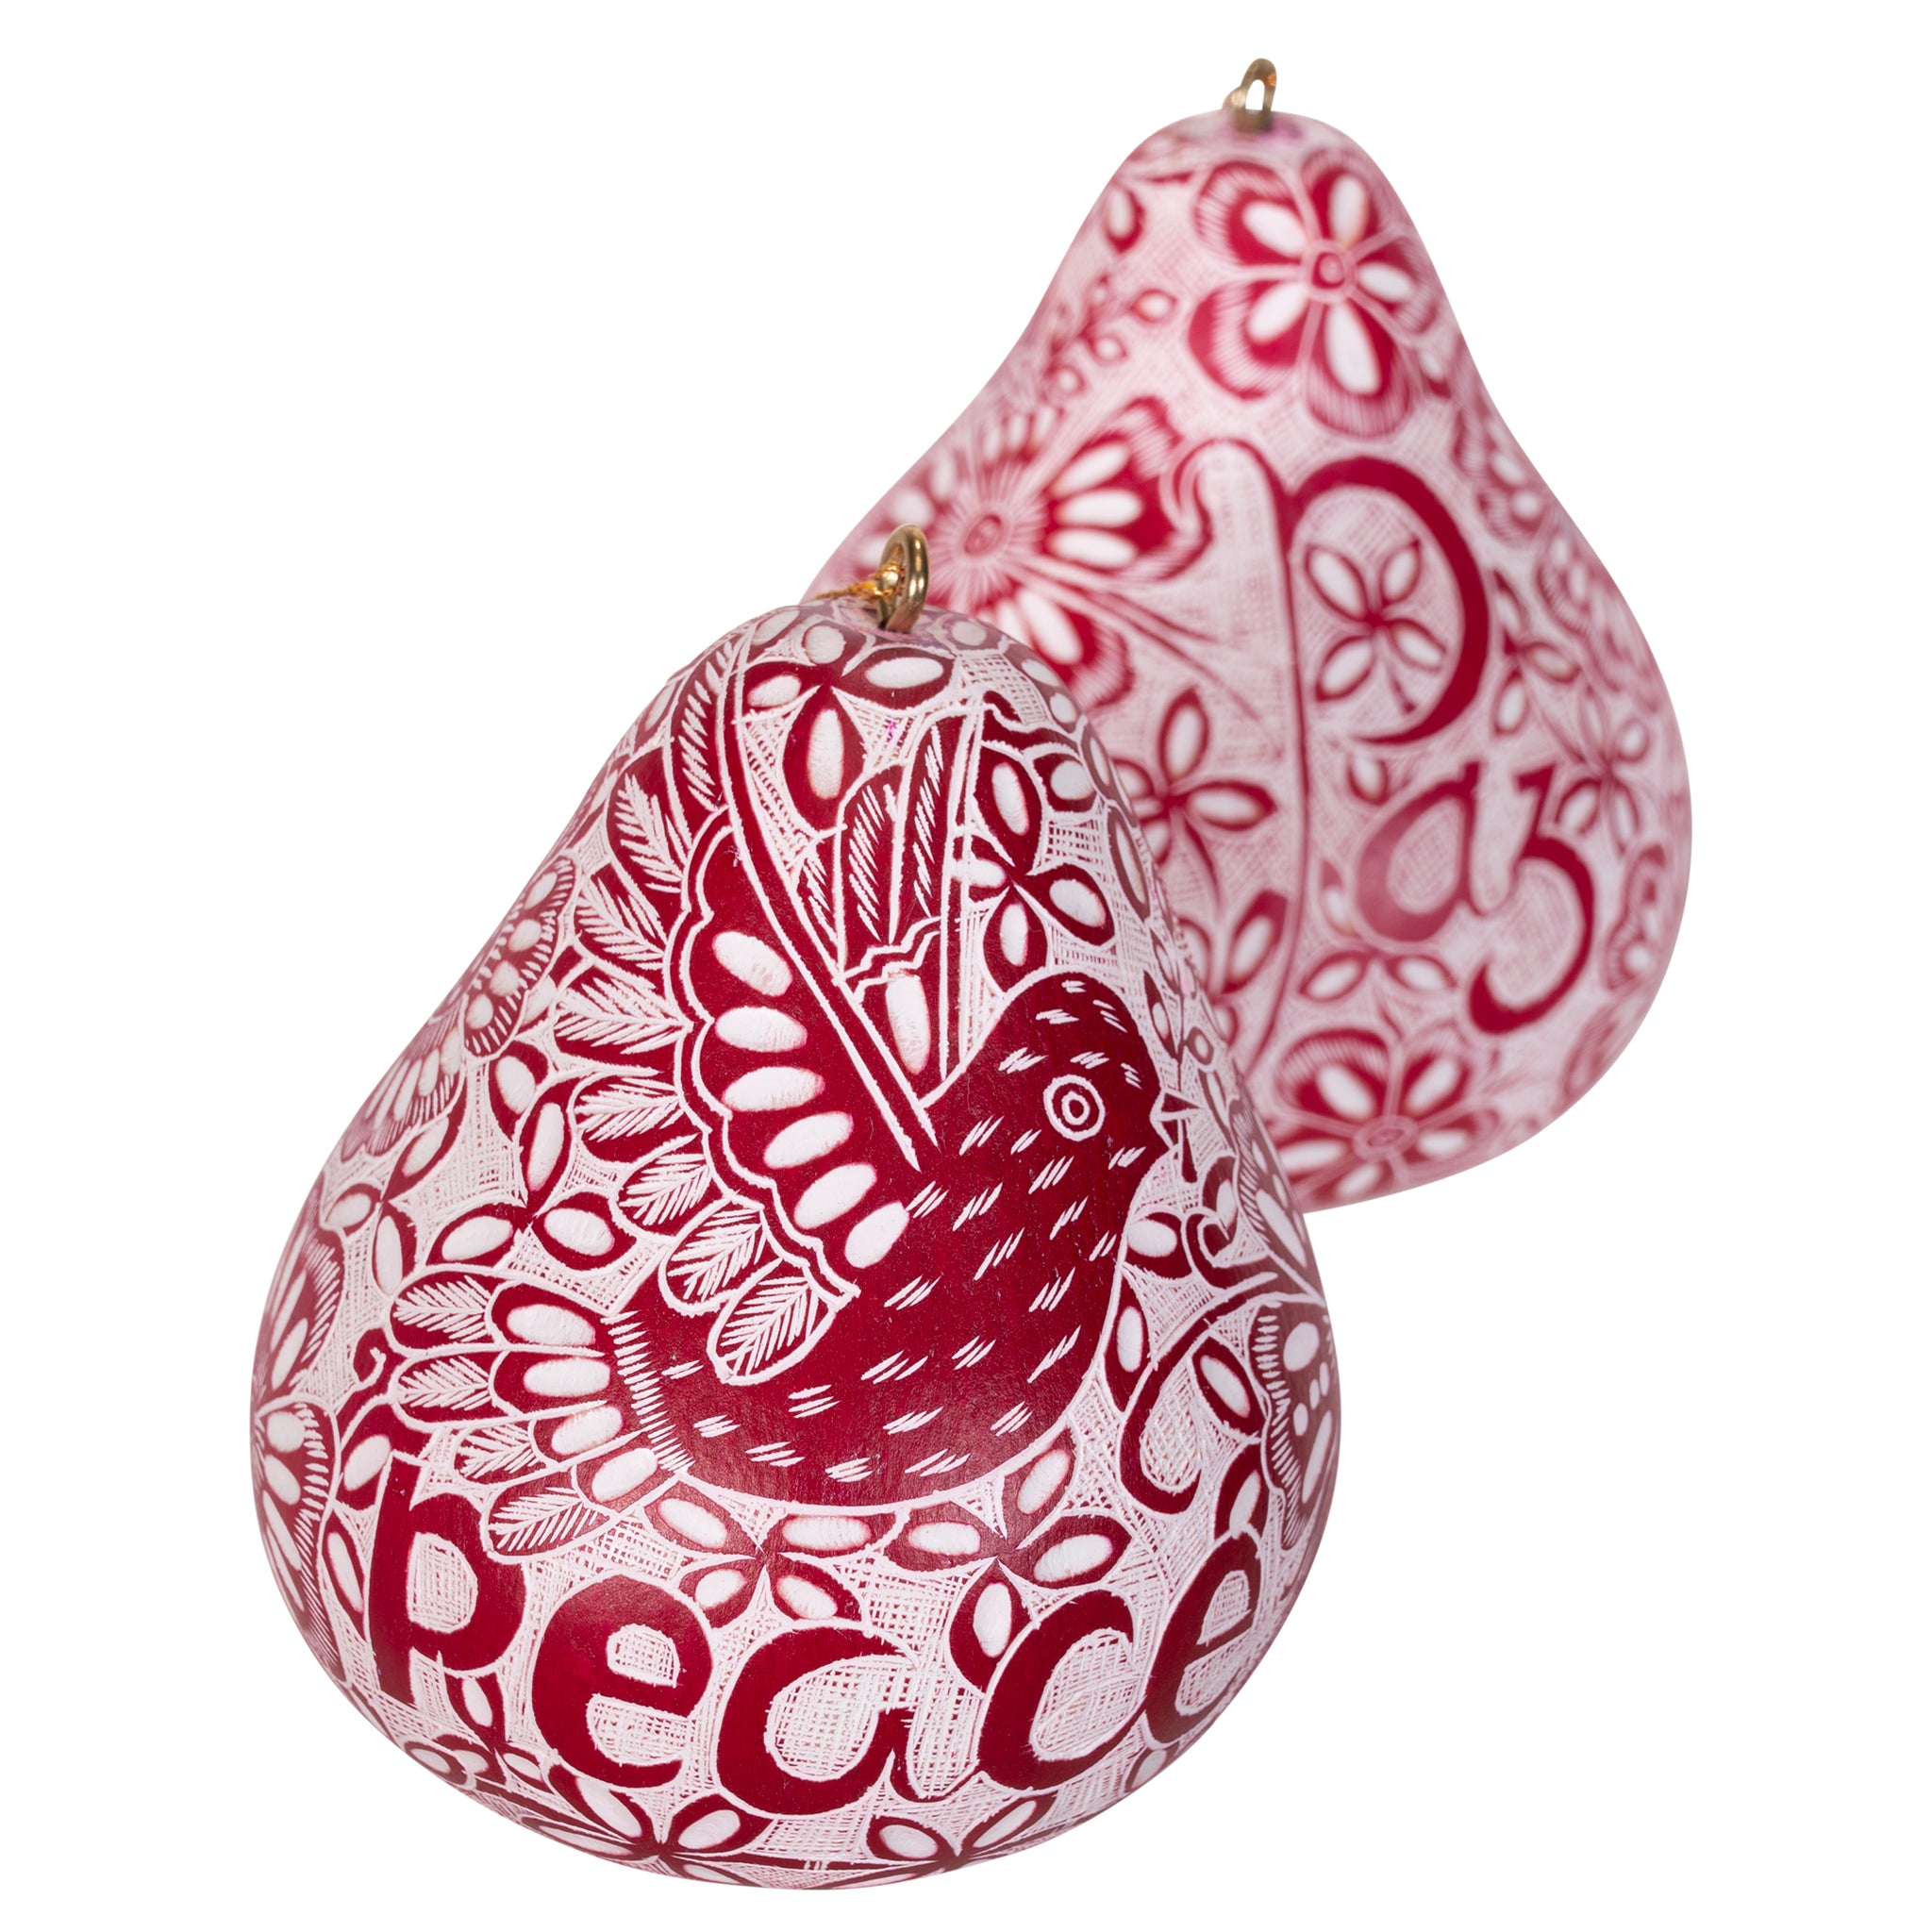 Dove of Peace - Gourd Ornament